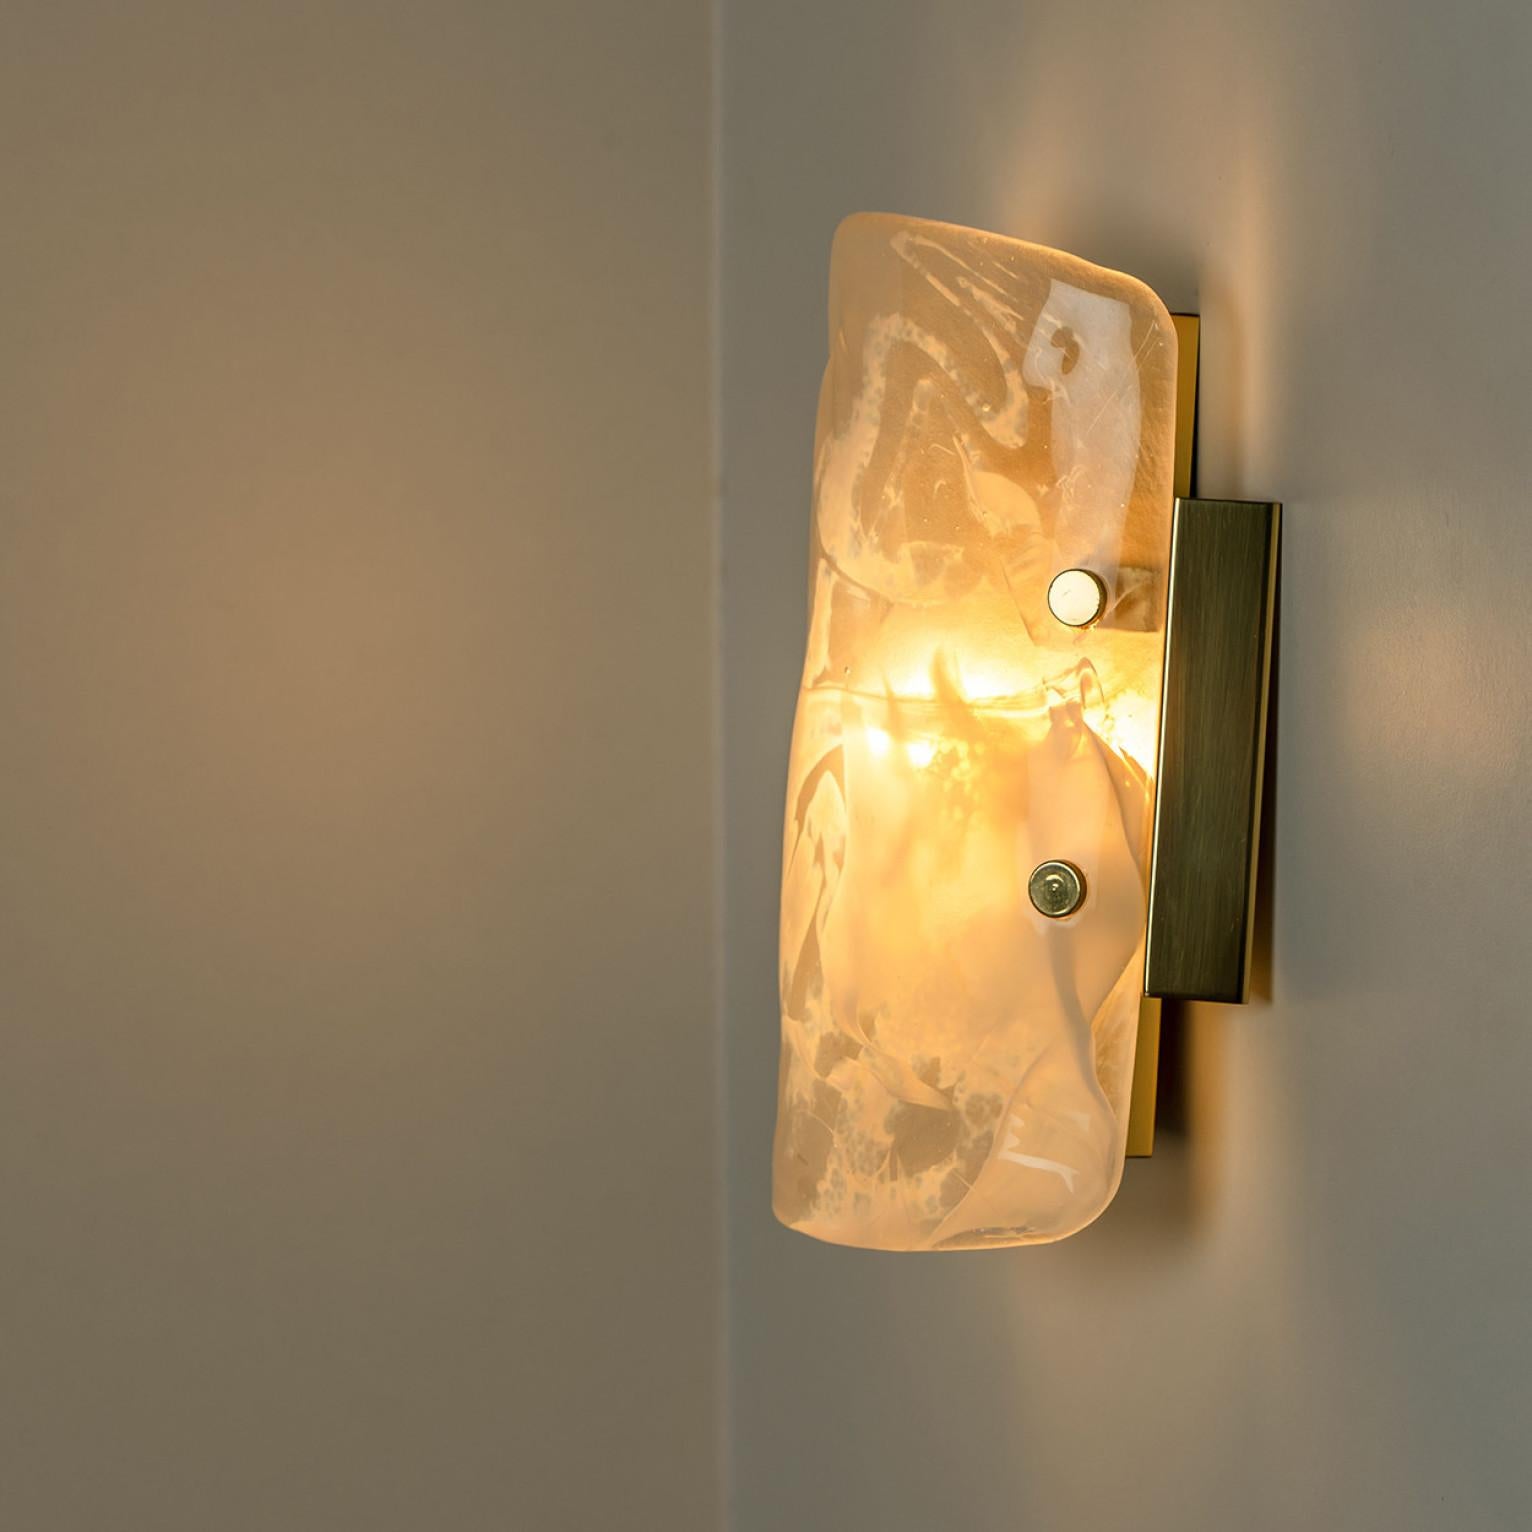 Hillebrand Marble Murano Glass Wall Light Fixtures, 1960s In Good Condition For Sale In Rijssen, NL